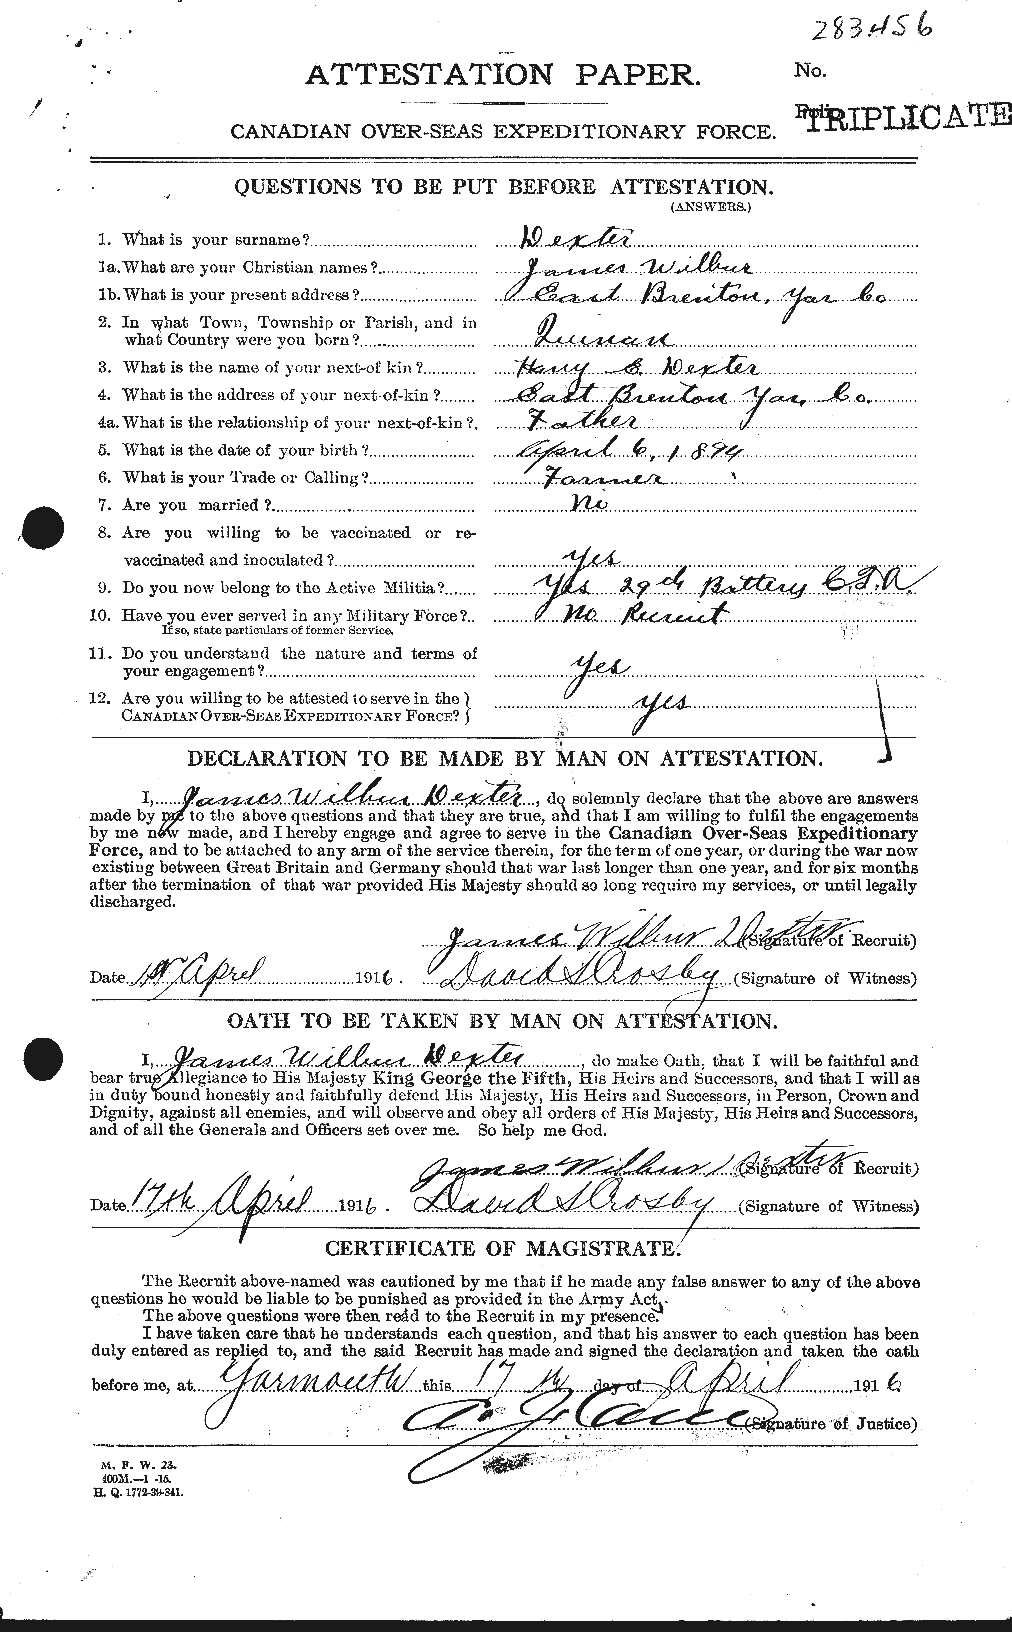 Personnel Records of the First World War - CEF 293163a